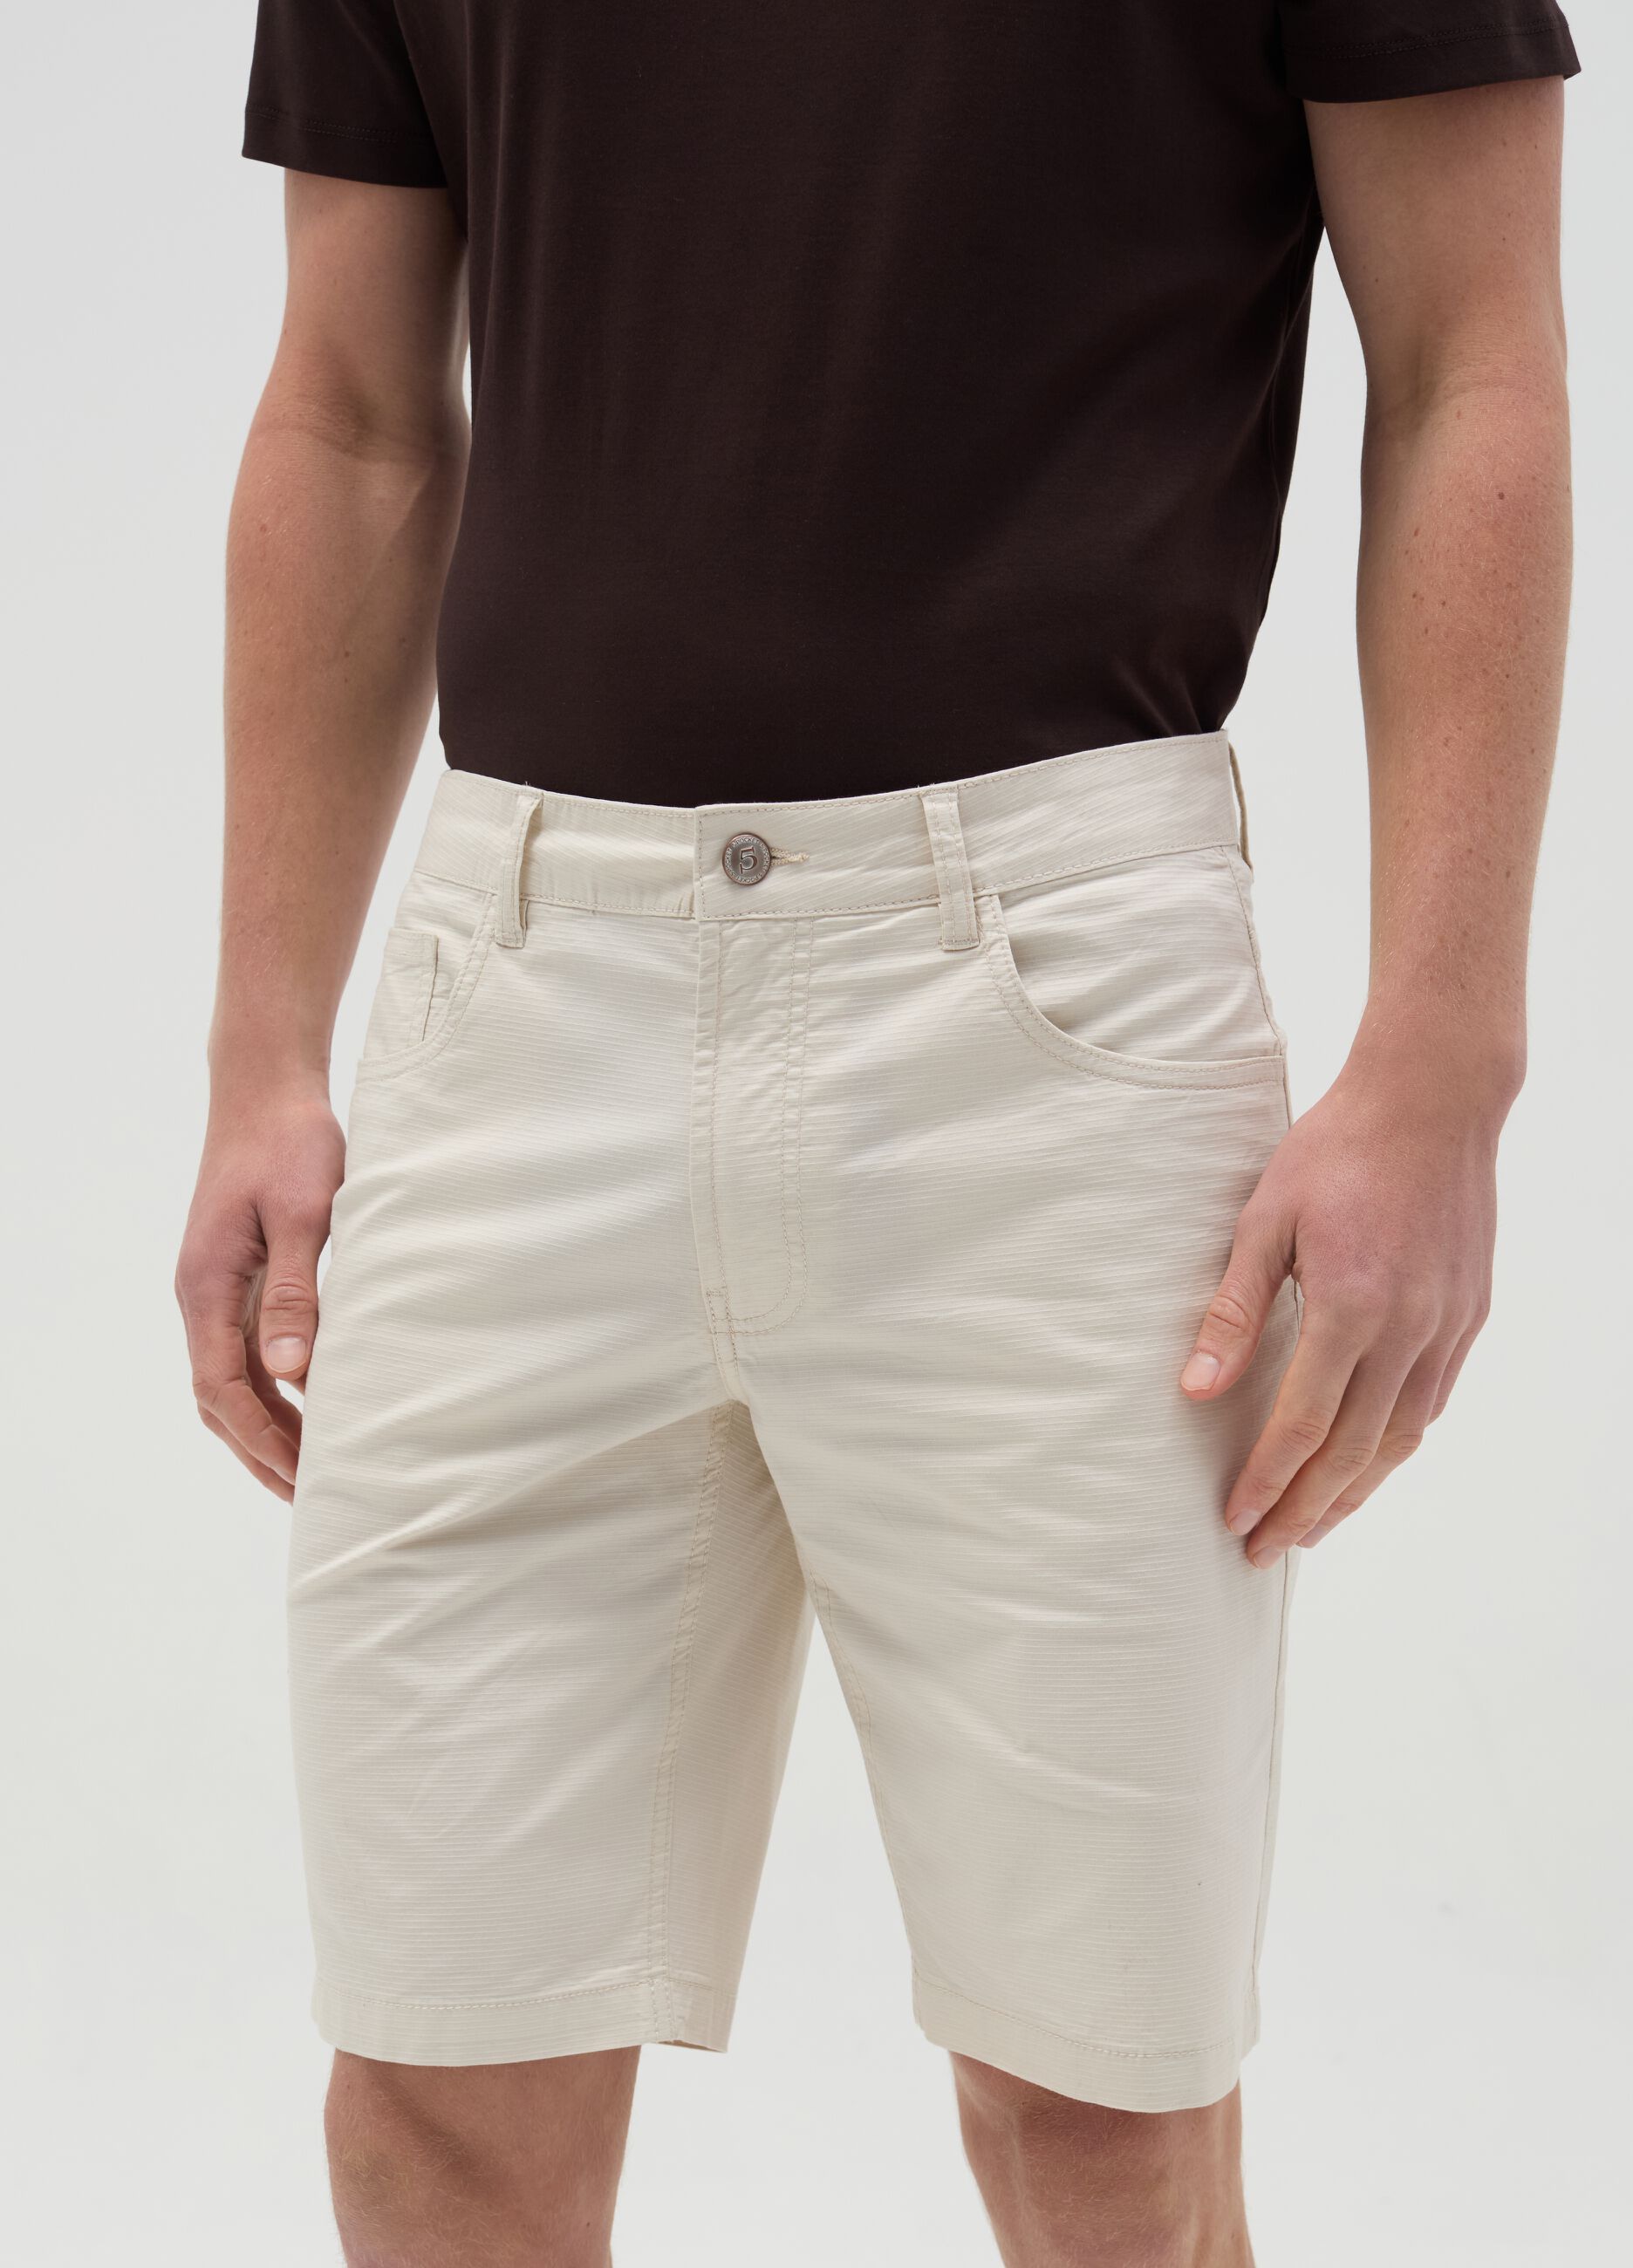 Bermuda shorts with five pockets and ripstop weave